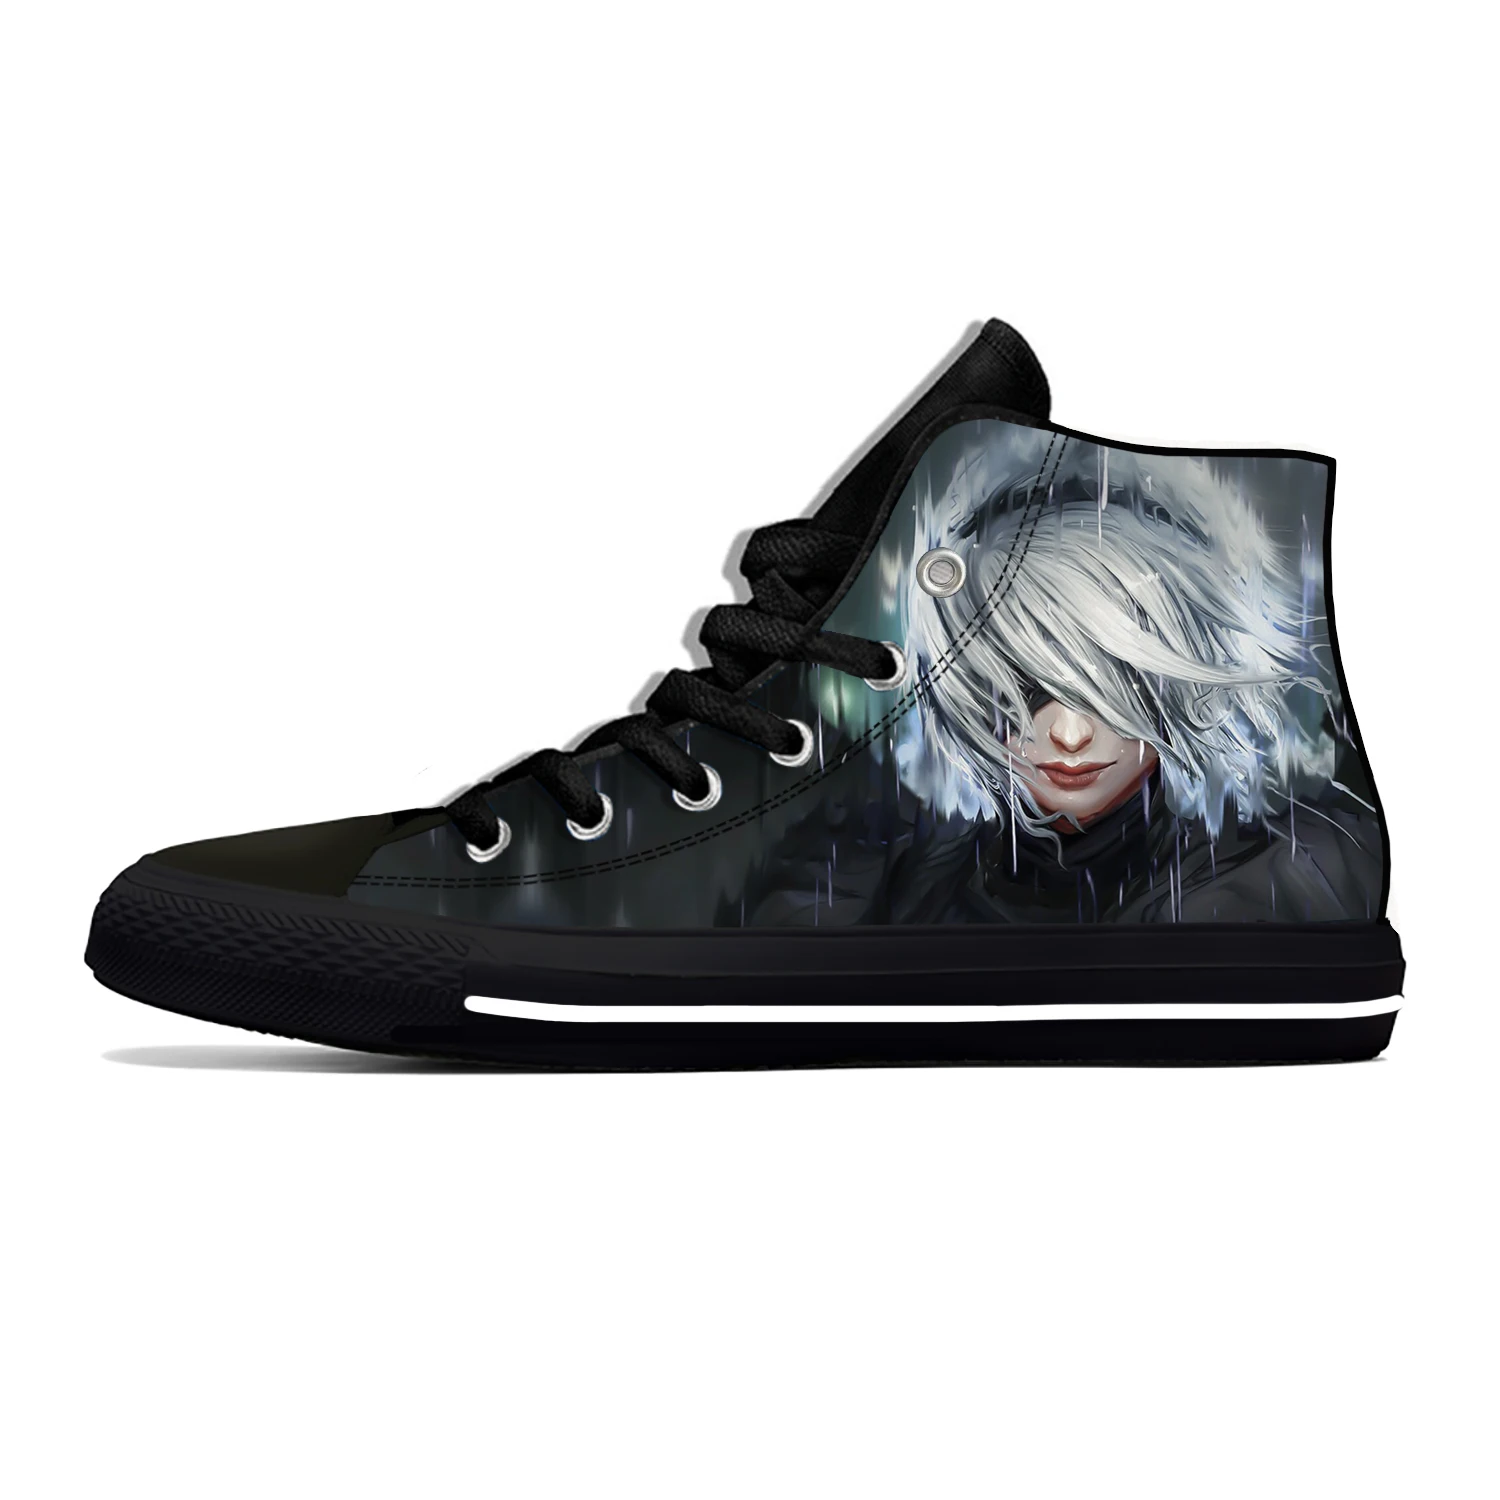 

NieR Automata Lightweight Cloth 3D Print Funny Hot Fashion High Top Canvas Shoes Mens Womens Teenager Casual Breathable Sneakers